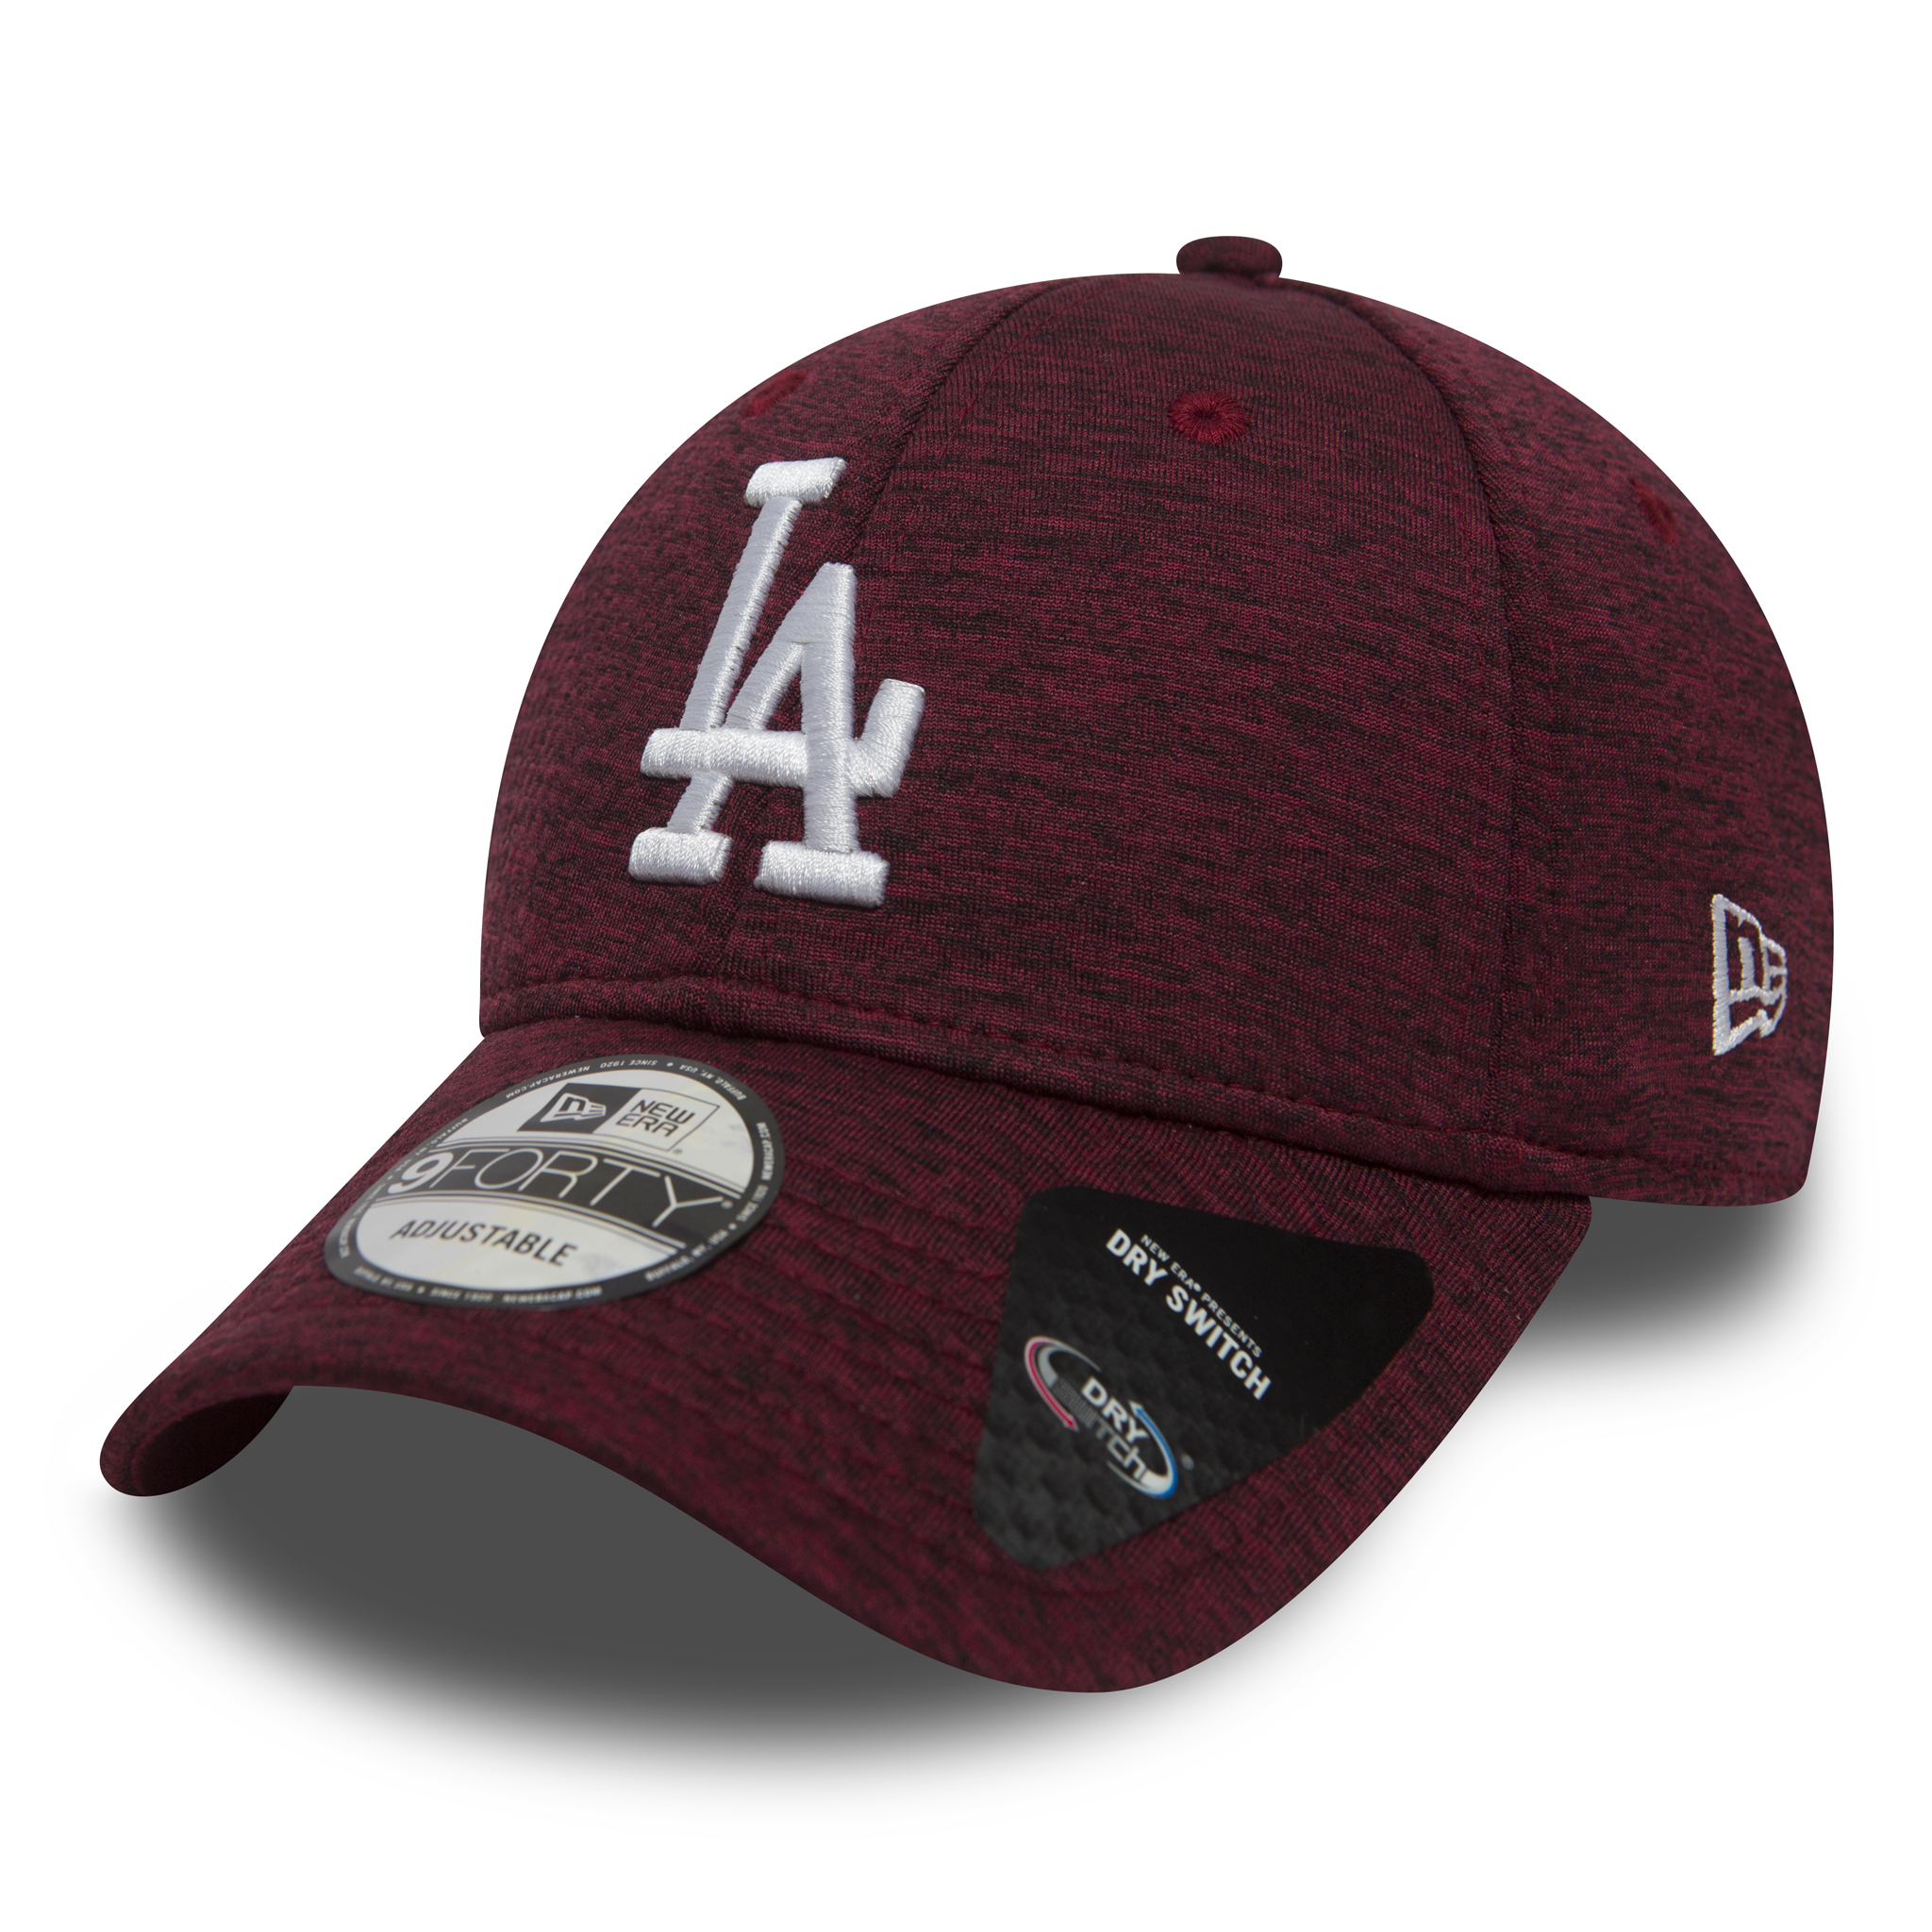 Cappellino 9FORTY Los Angeles Dodgers rosso cardinale